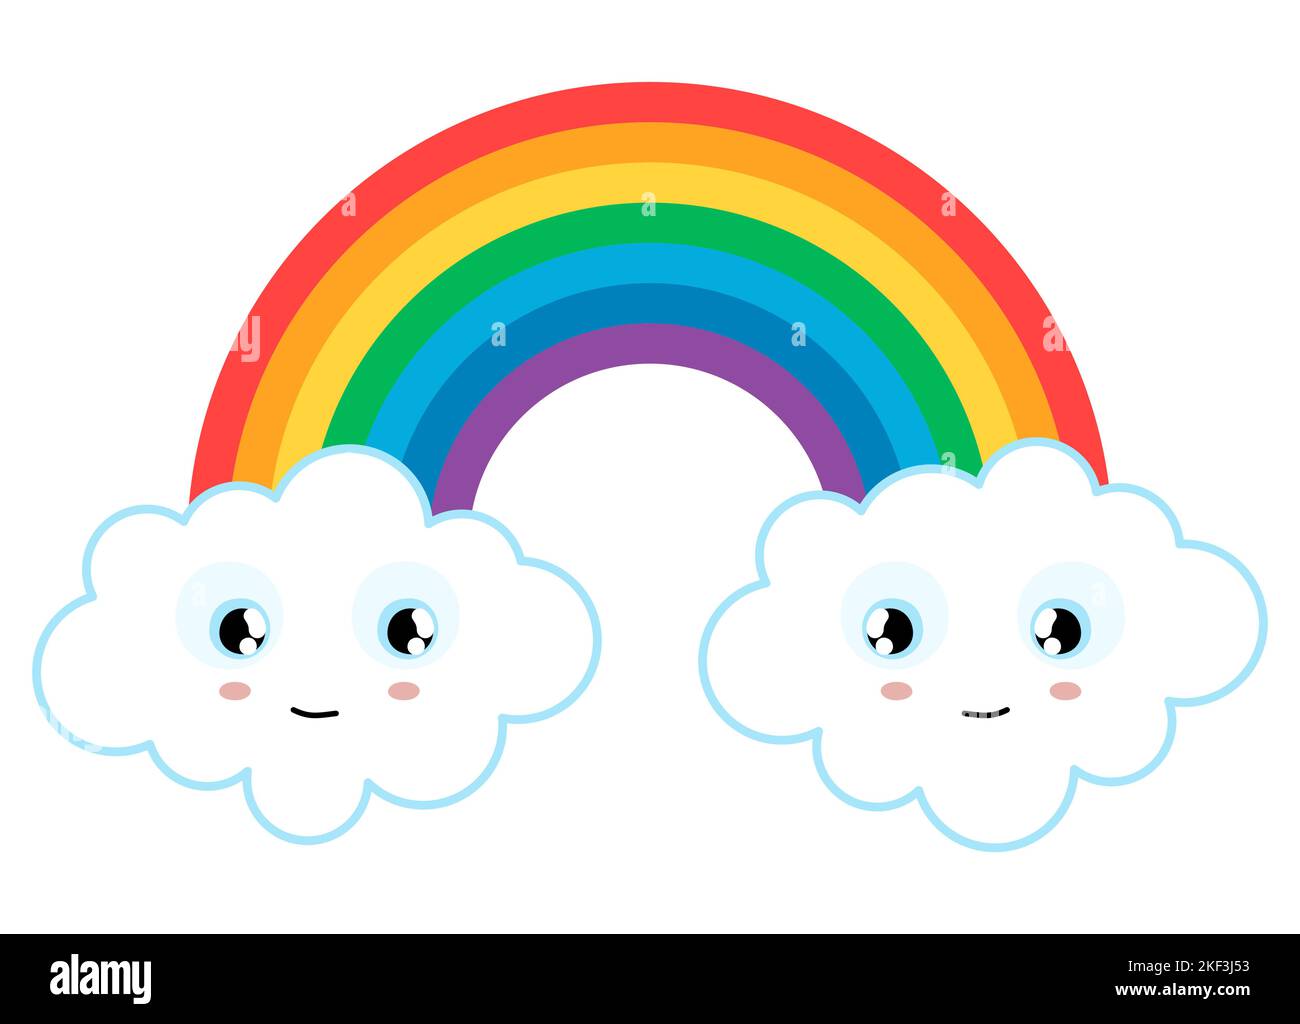 eps vector illustration with wonderful colored rainbow with white clouds with nice smiling faces at the ends Stock Vector